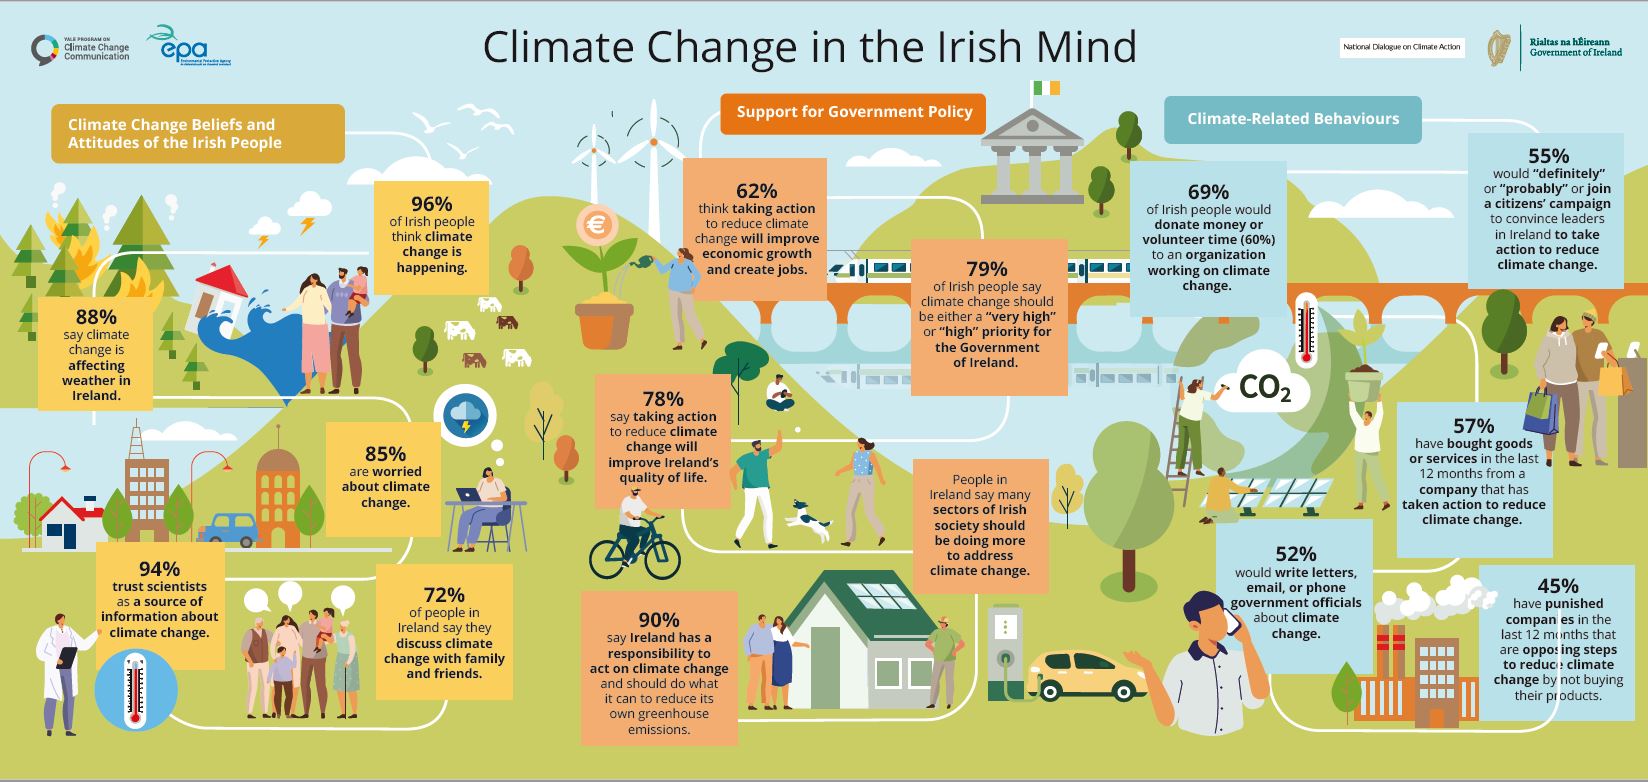 Climate Change in the Irish Mind infographic